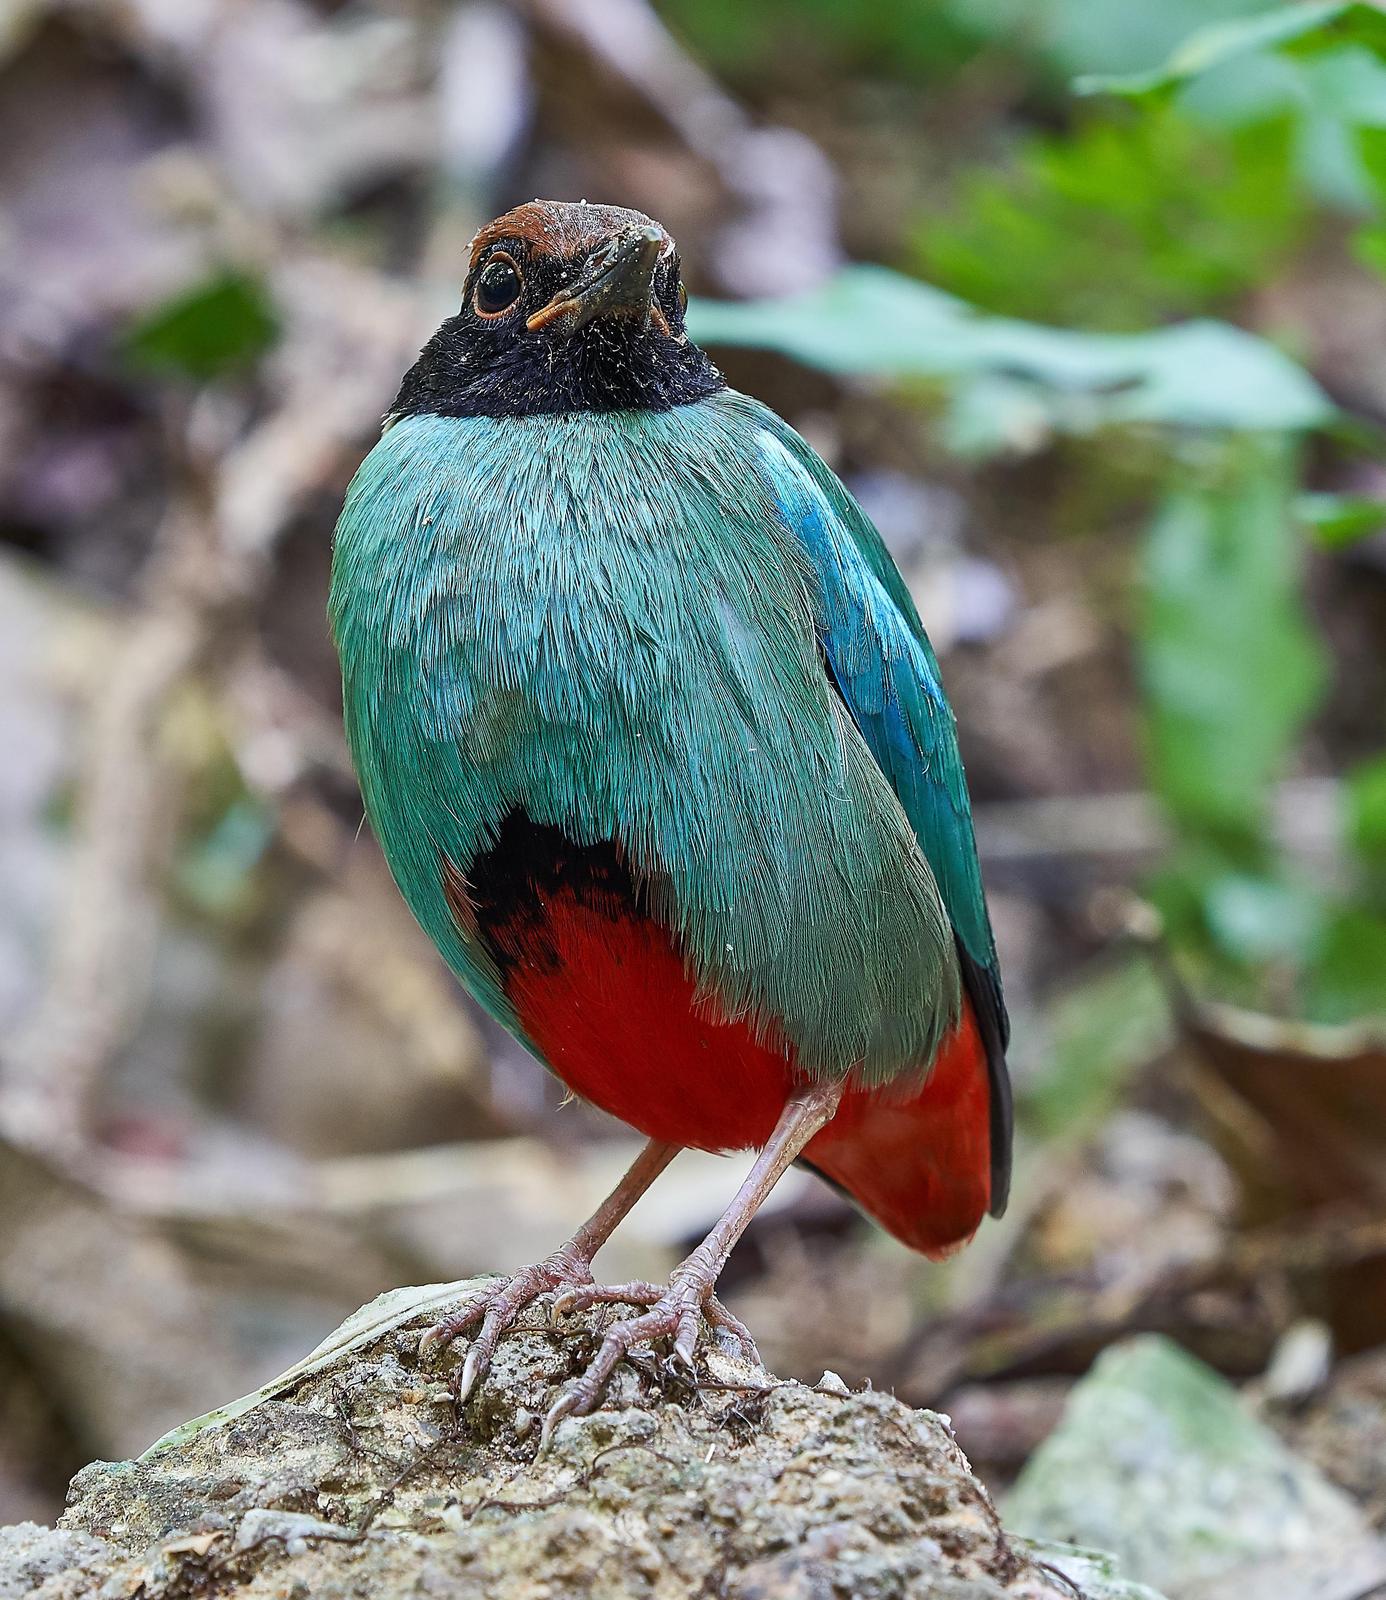 Hooded Pitta Photo by Steven Cheong